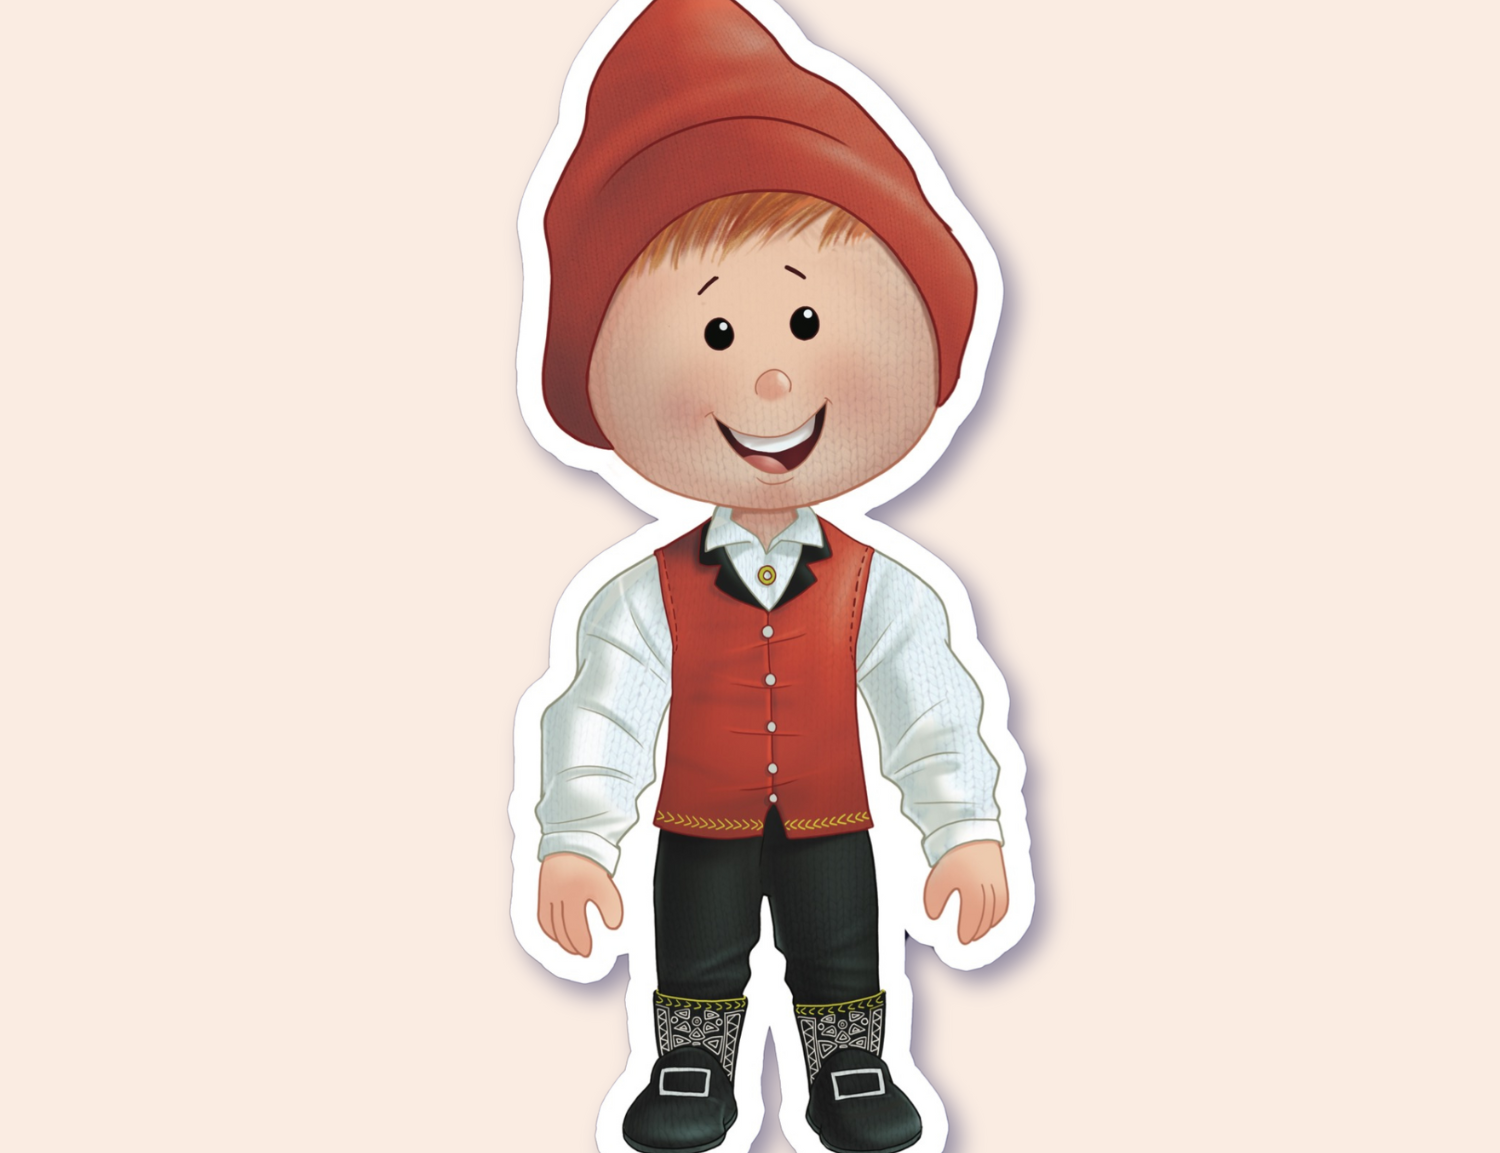 A sticker of a smiling boy dressed in traditional Nordic attire, including a red pointed hat and black boots with decorative buckles.